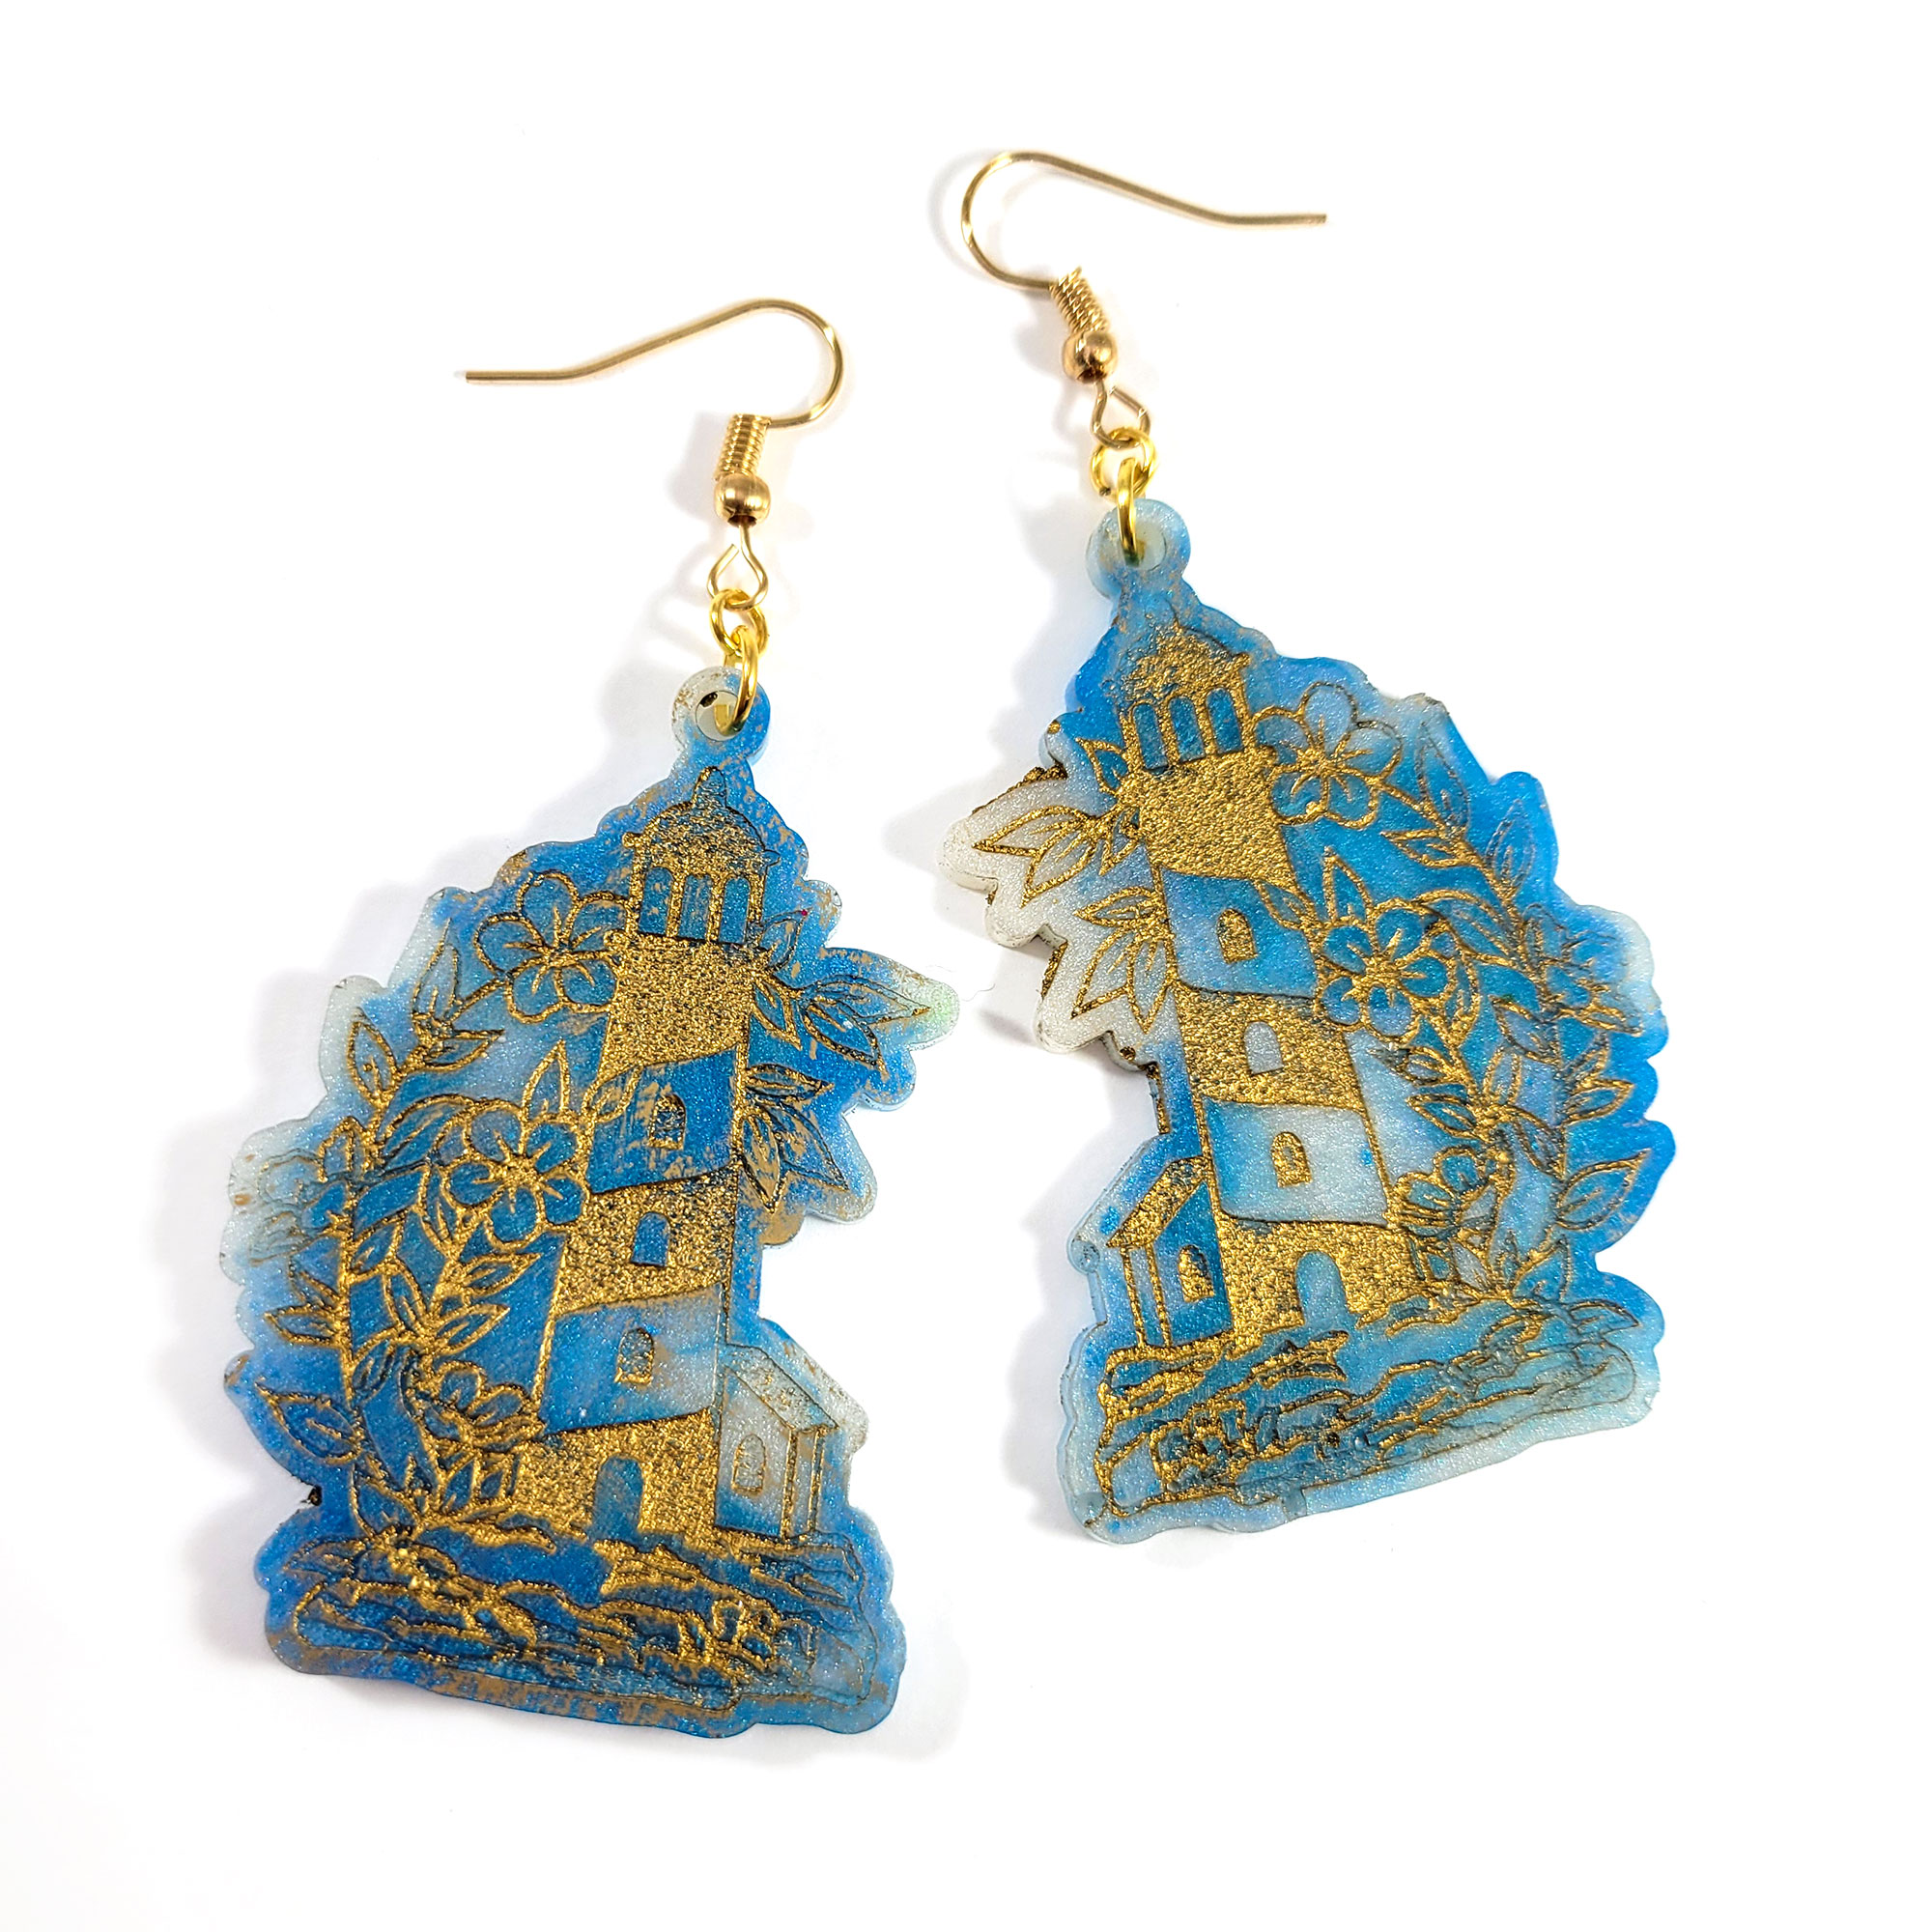 The Lighthouse Earrings by Wilde Designs